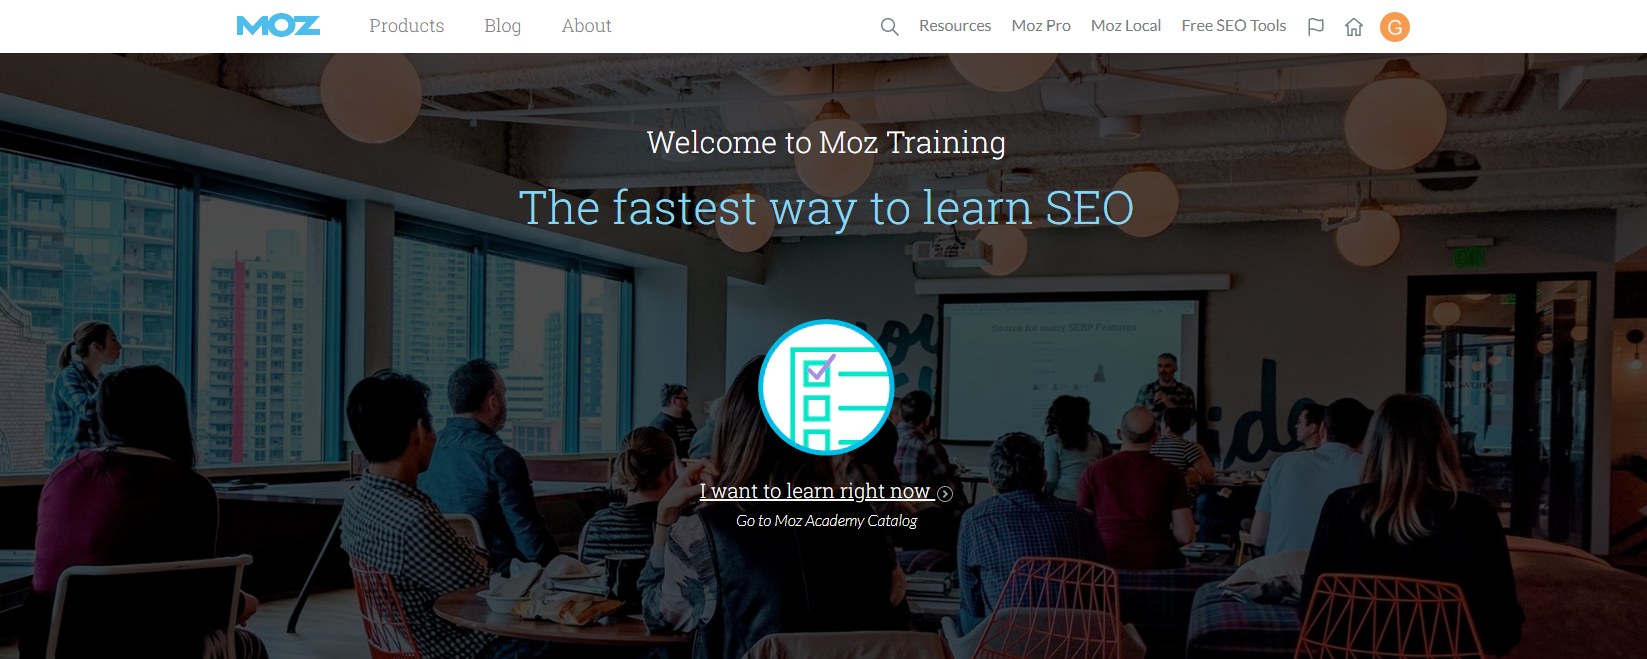 Moz training course